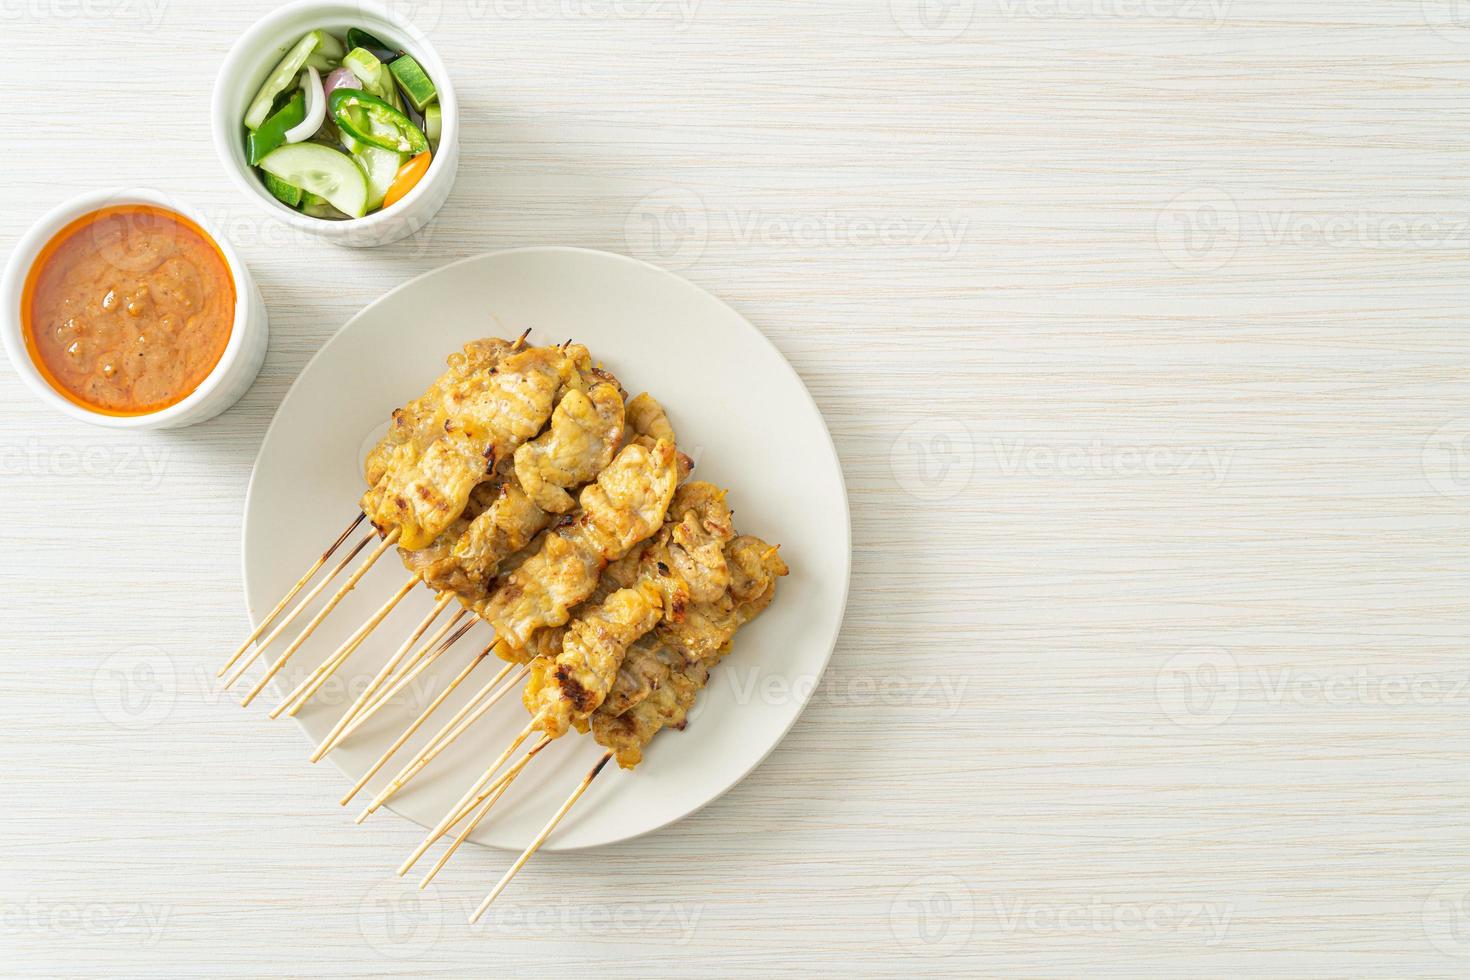 Pork satay with peanut sauce pickles which are cucumber slices and onions in vinegar photo